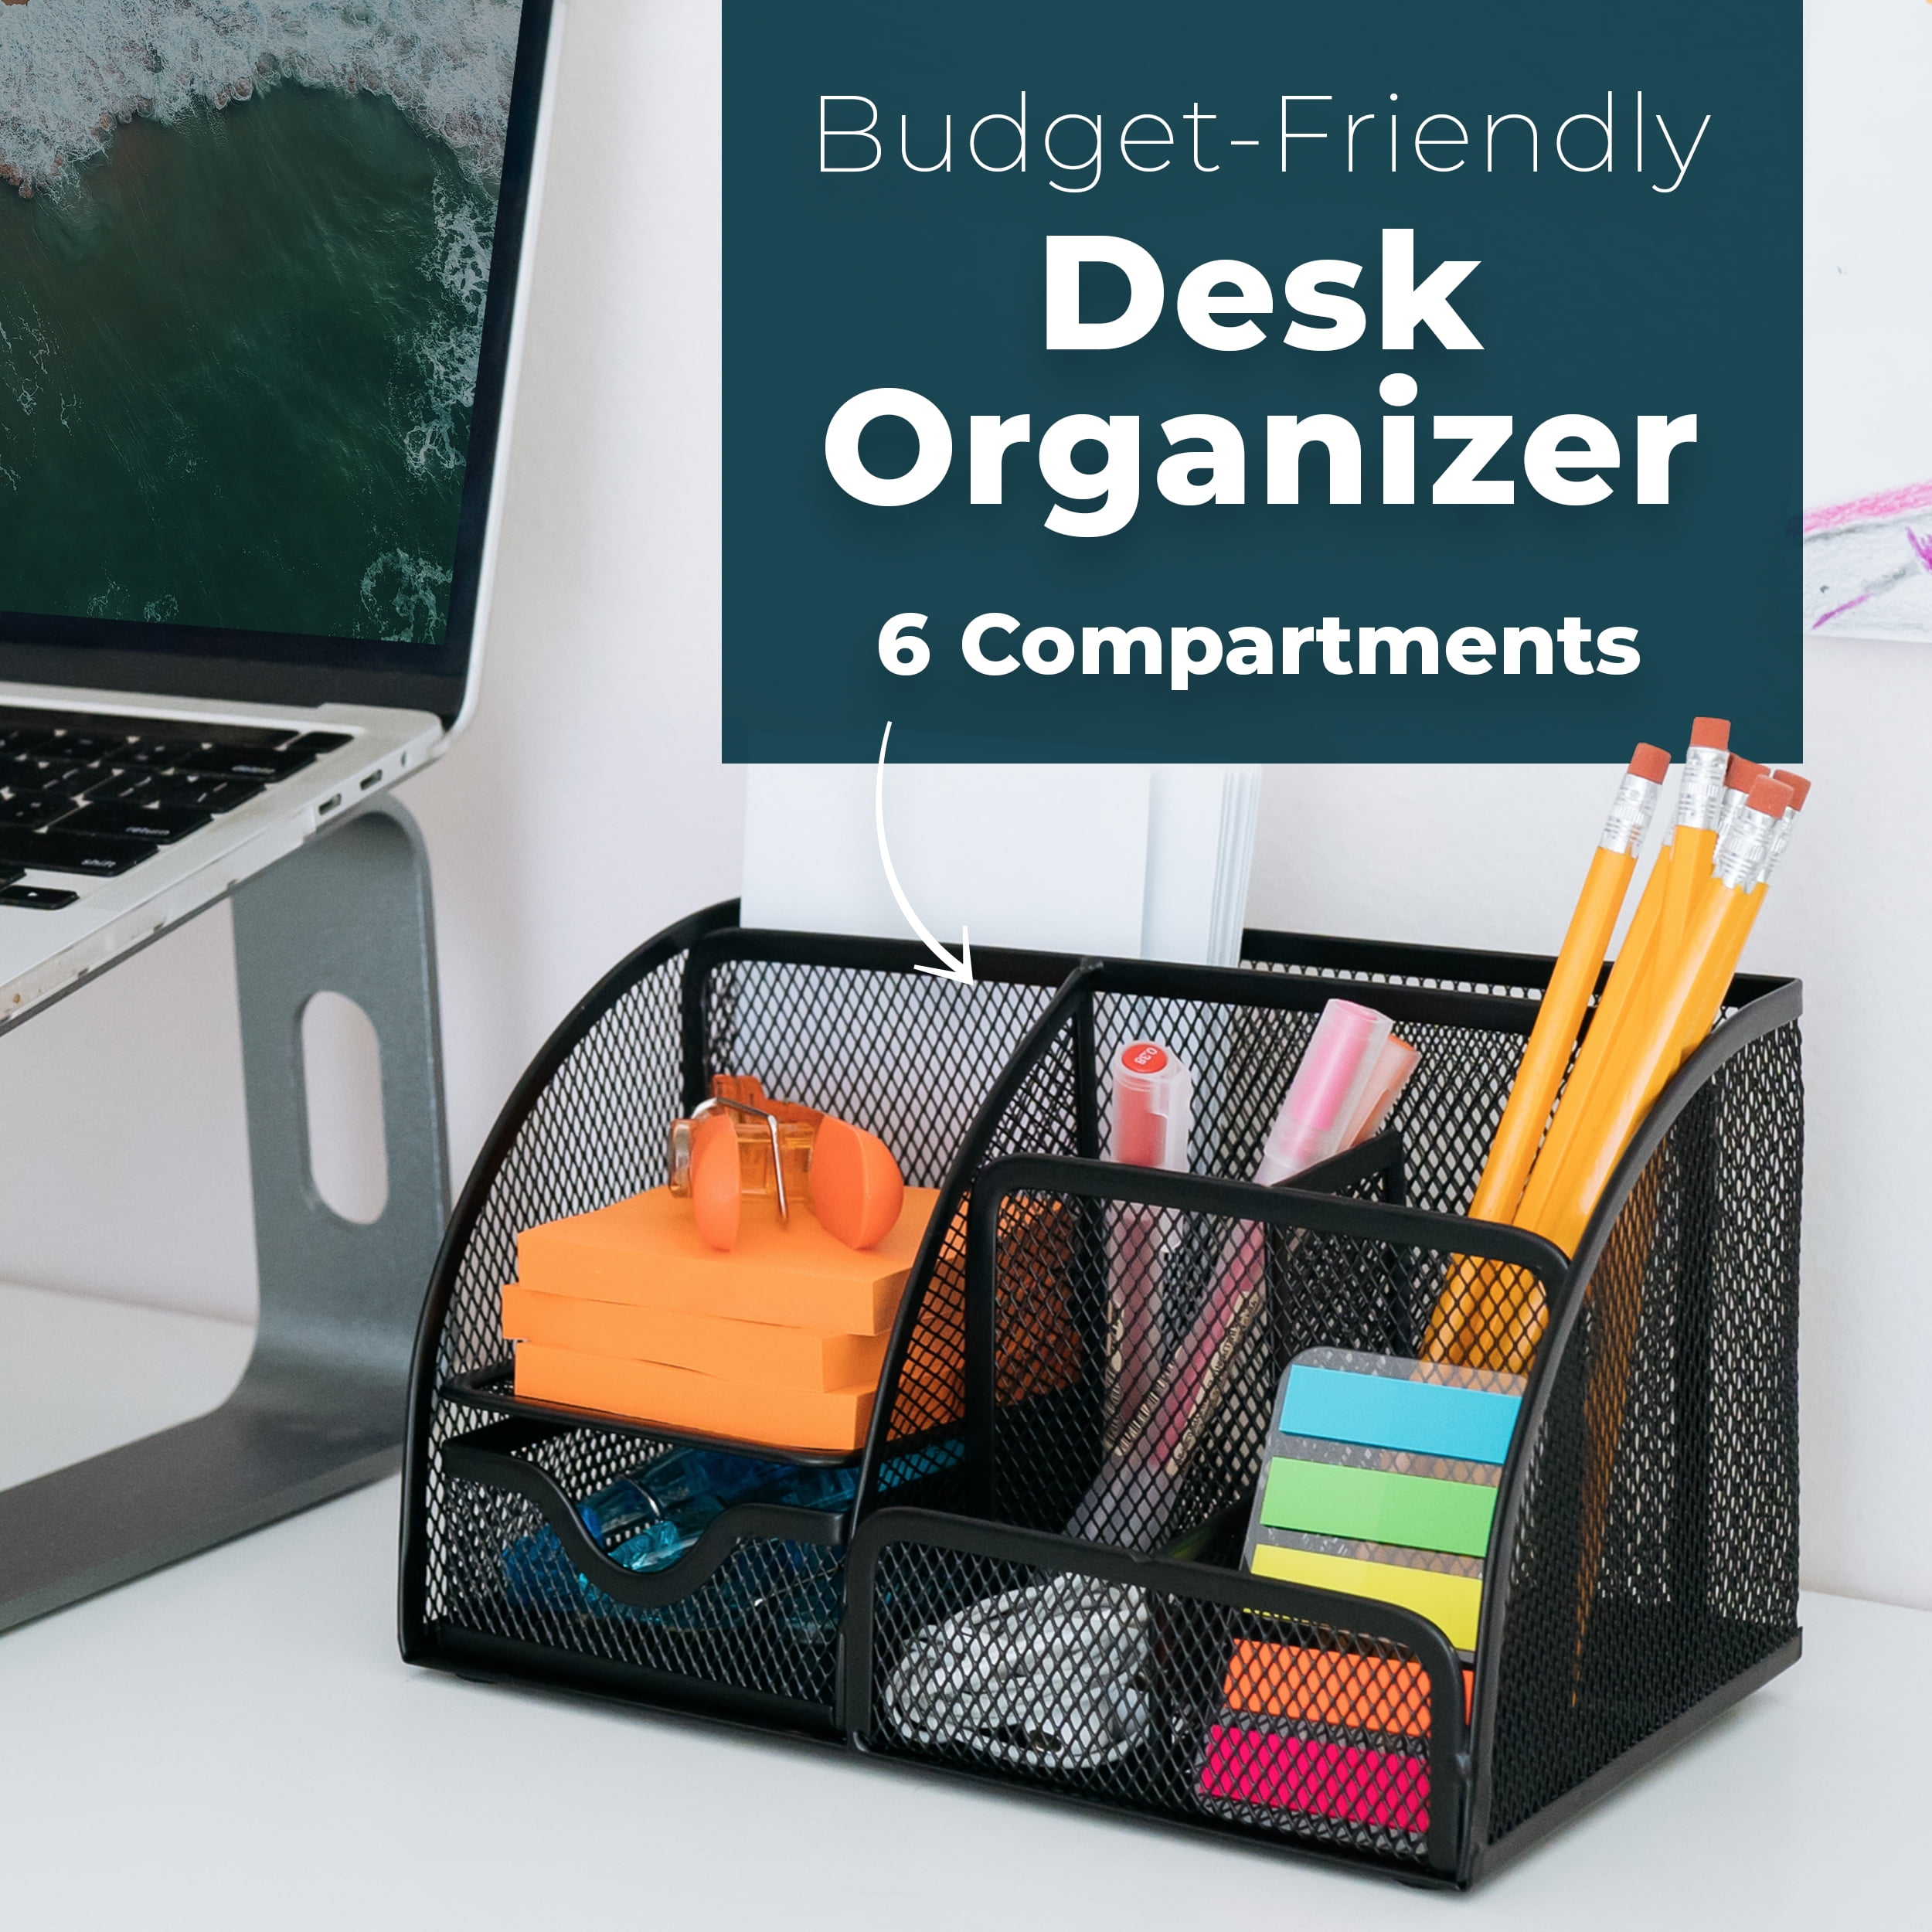 vedett Office Desk Organizer with 6 Compartments + Pen Holder / 72  Accessories, Desk Accessories Organizers for Office, Home, School (Black)